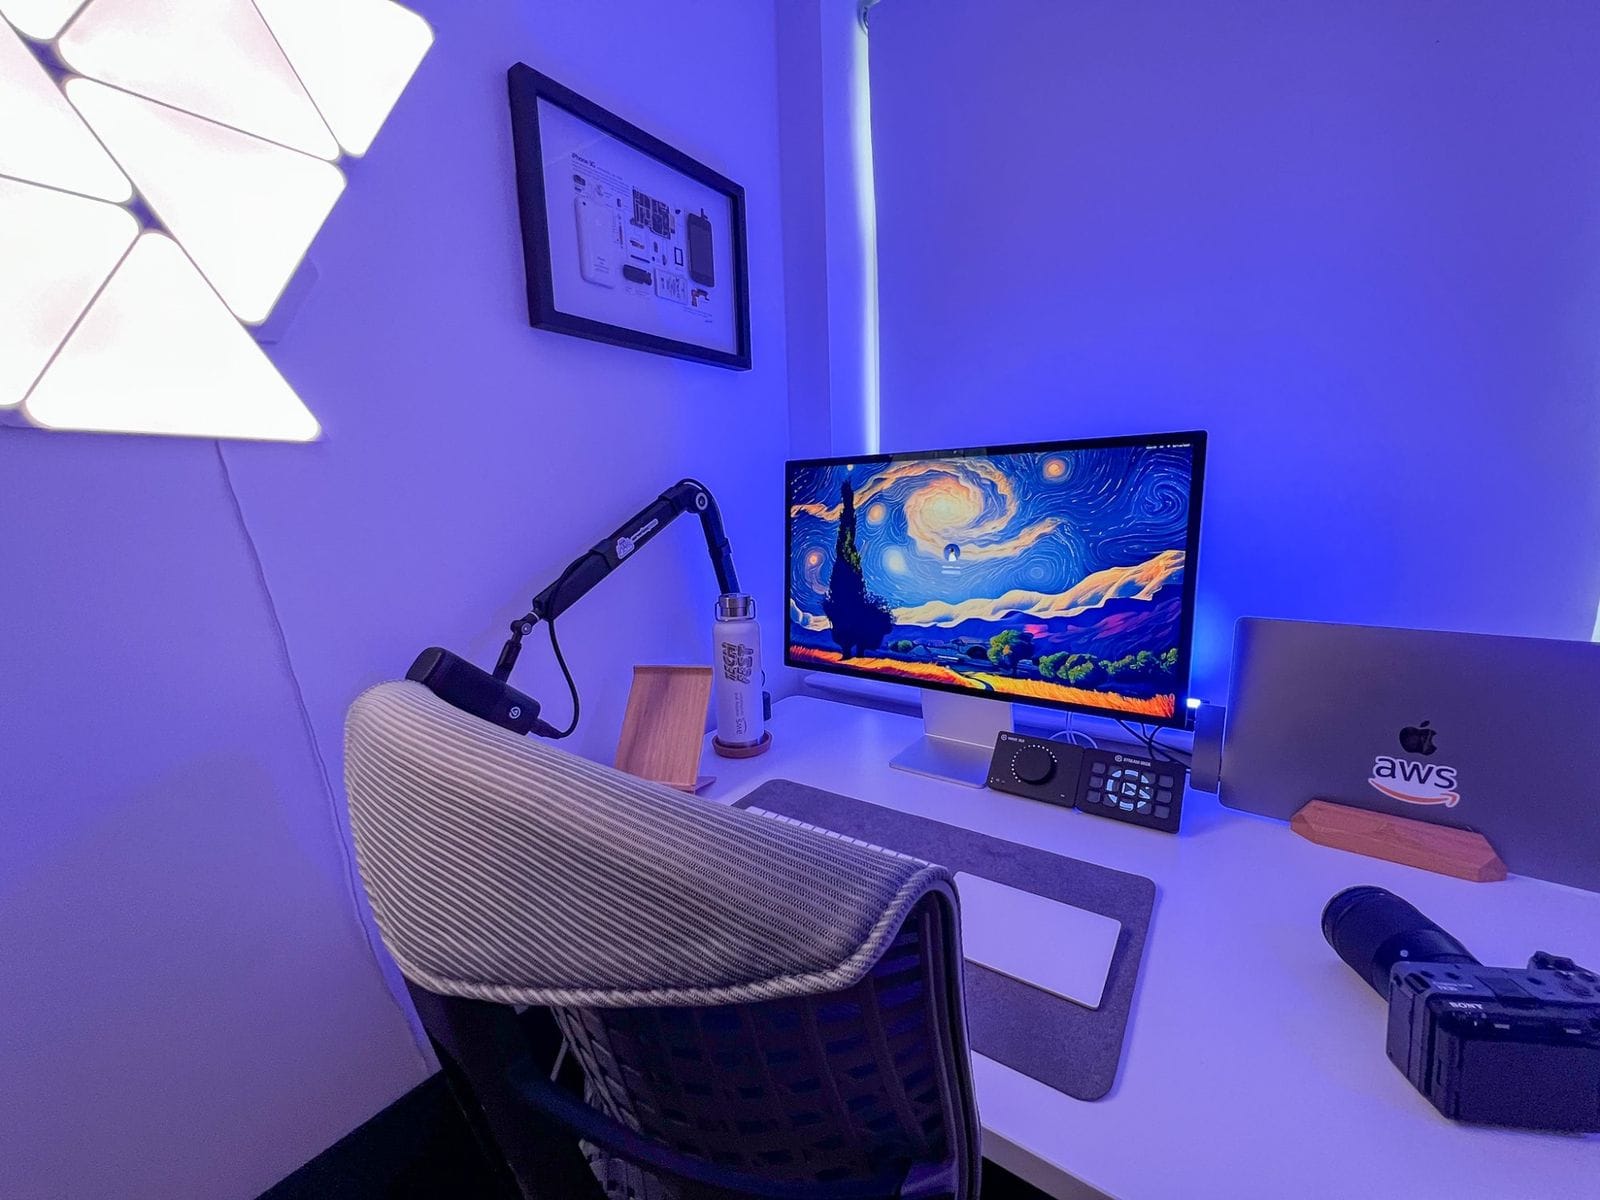 A modern home office setup illuminated by ambient blue lighting, featuring an Apple Studio Display with a vibrant screensaver, a MacBook with AWS branding, ergonomic chair, desk lamp, and a framed artwork on the wall, all arranged on a clean desk